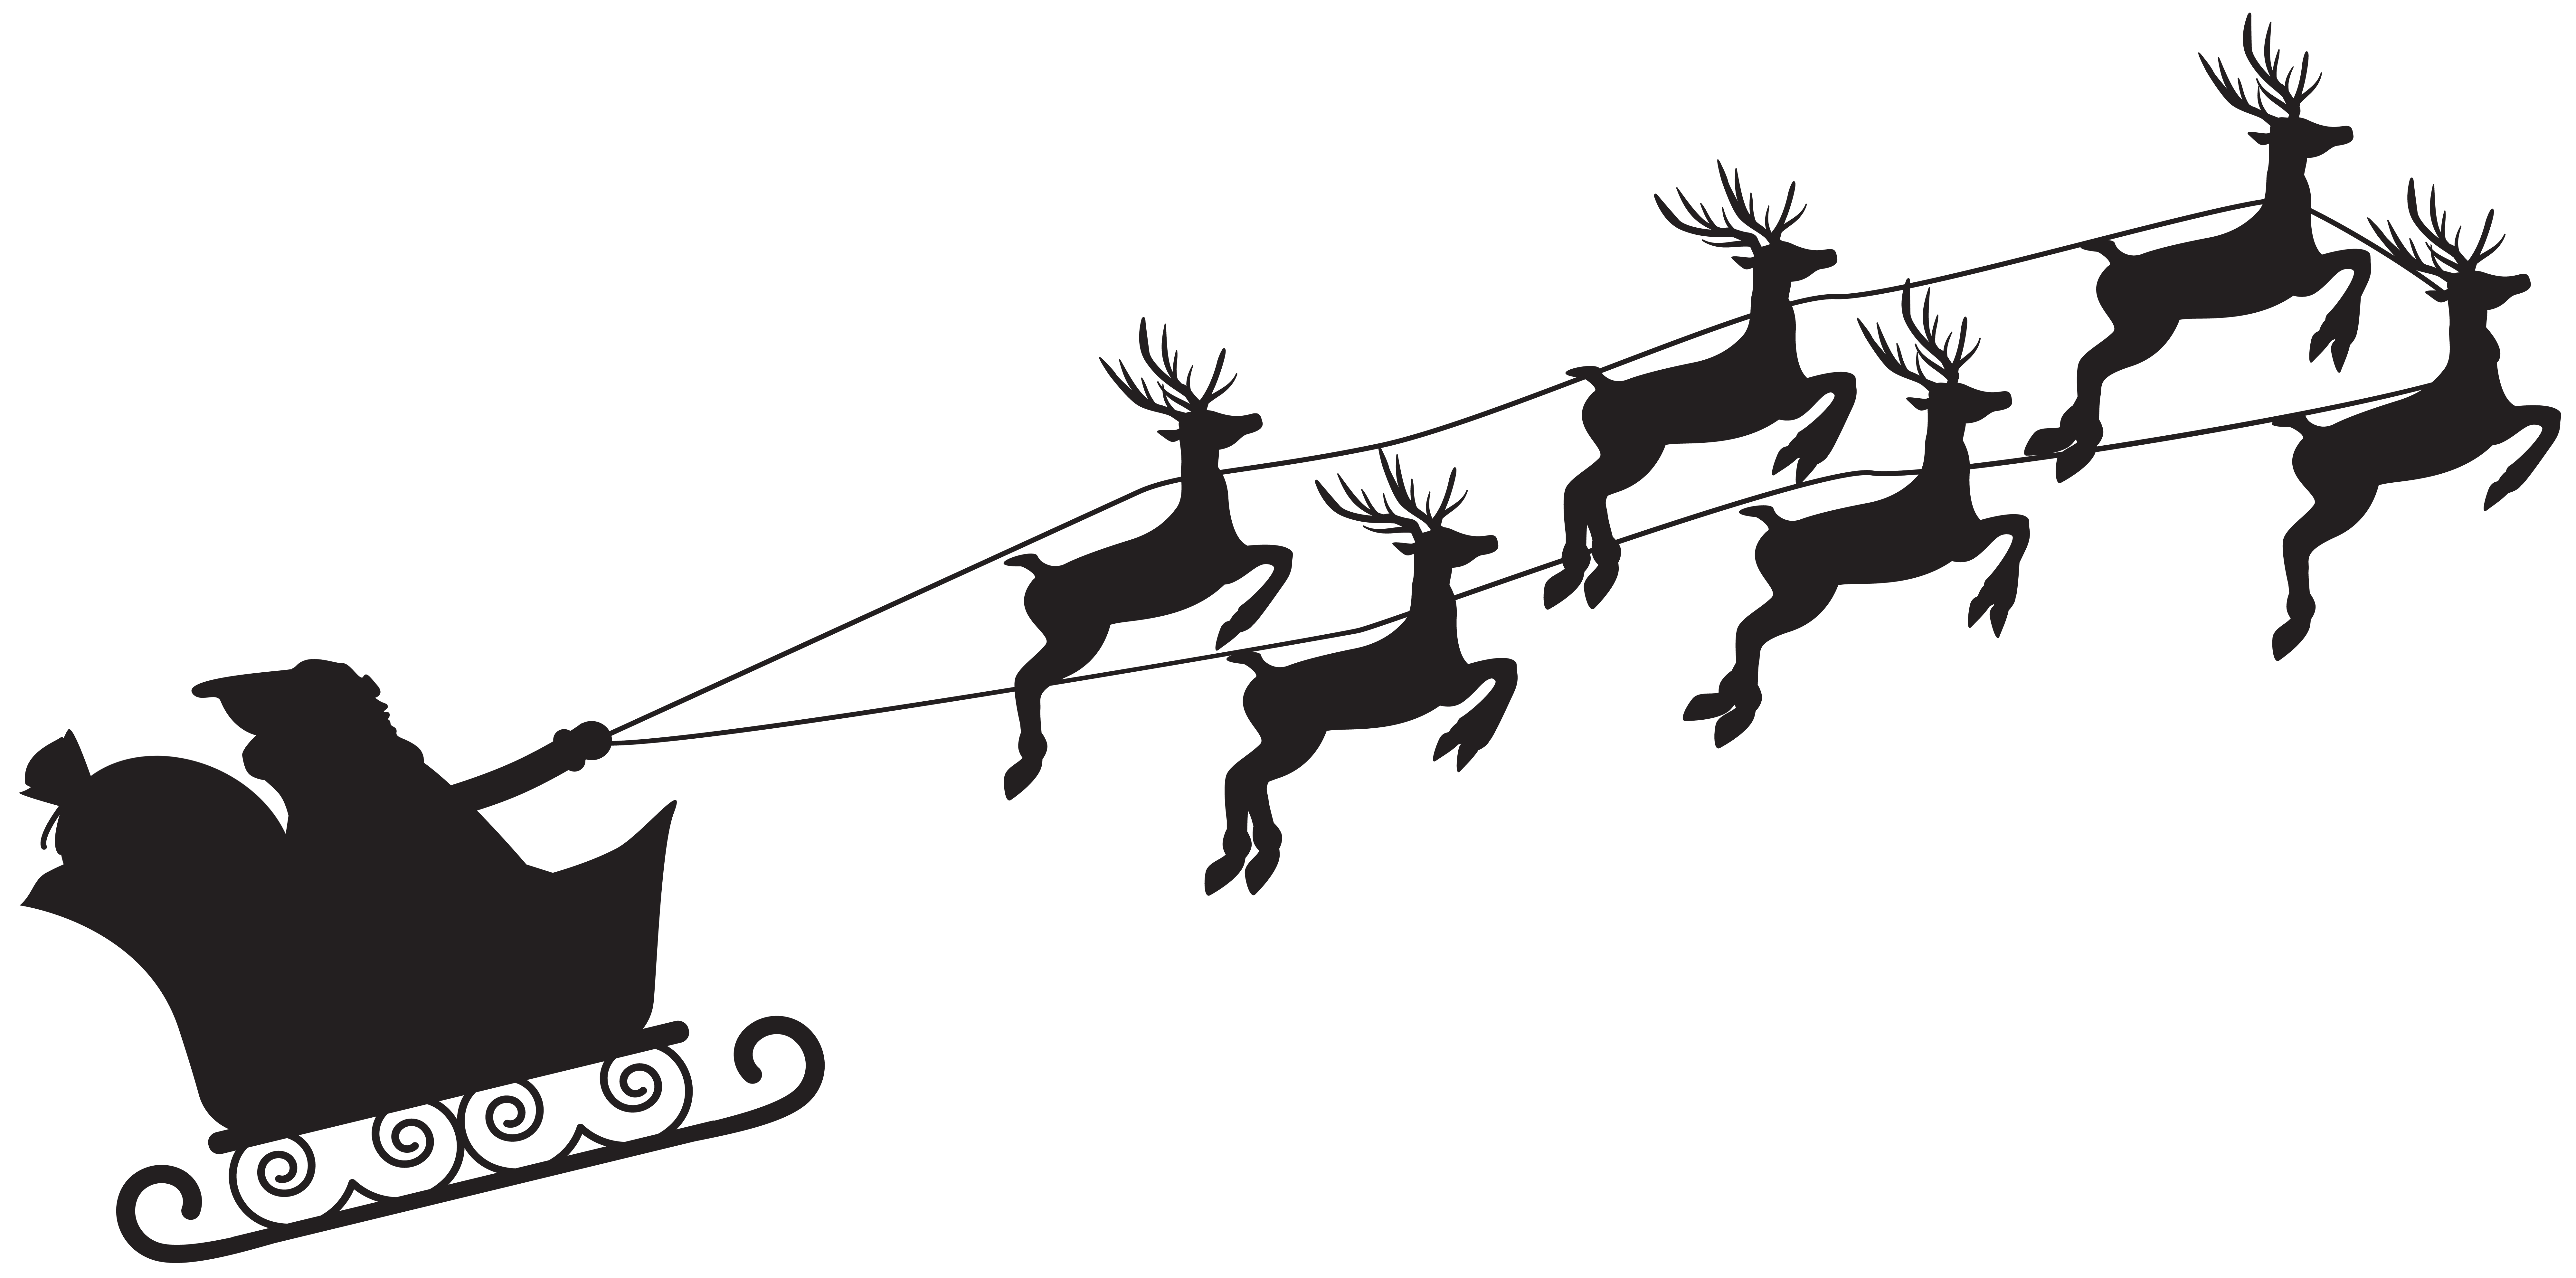 Santa Claus Silhouette PNG Clip Art | Gallery Yopriceville - High-Quality Images and Transparent ...